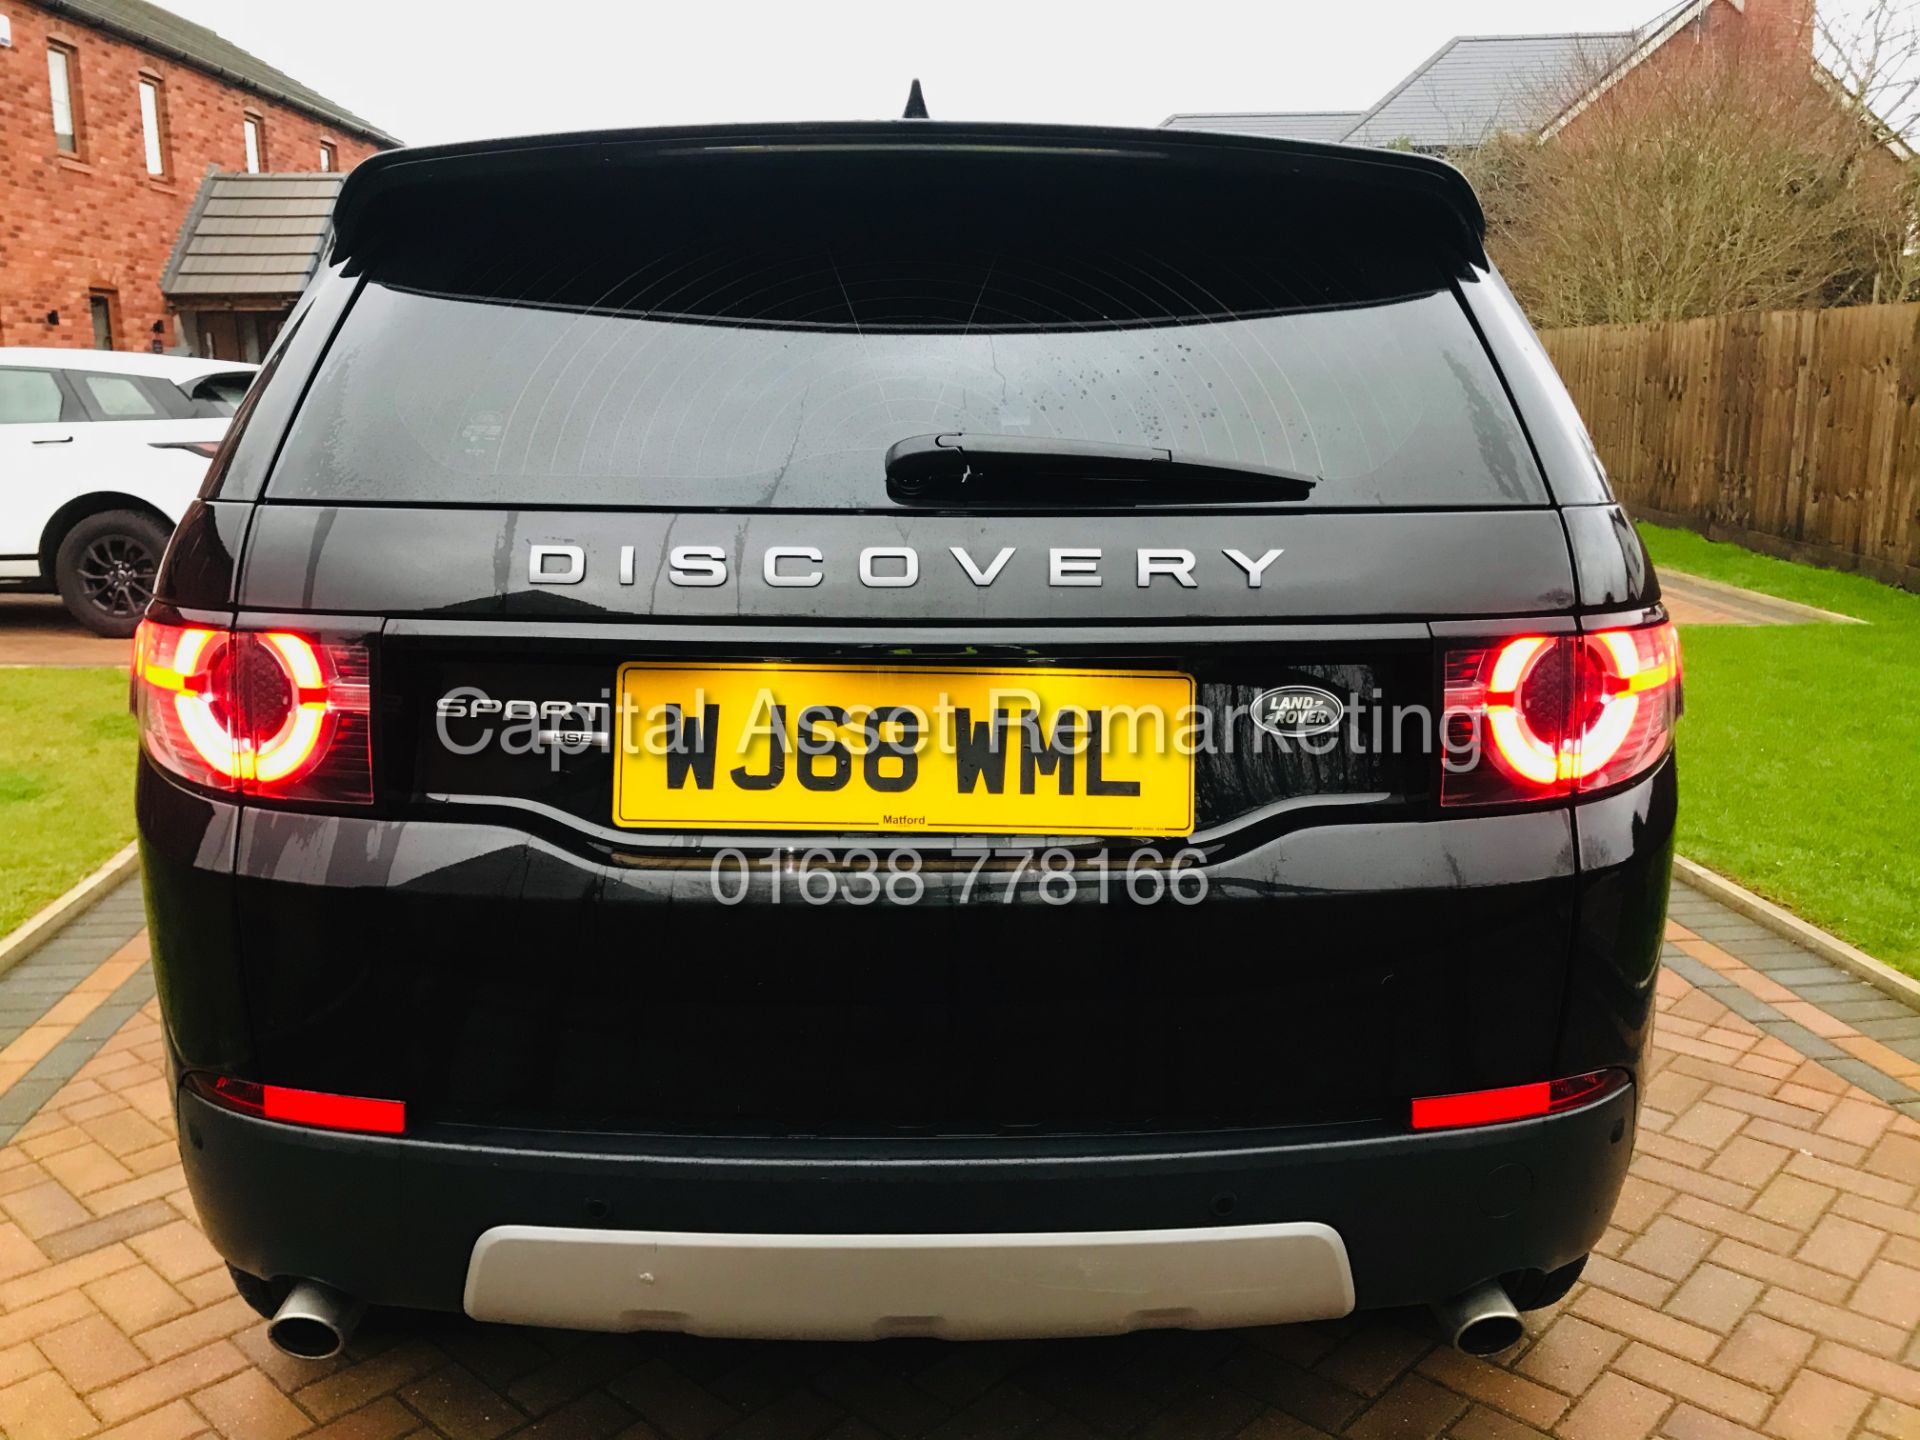 ON SALE LAND ROVER DISCOVERY SPORT "HSE" AUTO 7 SEATER (2019 MODEL) - SAT NAV -LEATHER *PAN ROOF* - Image 10 of 35